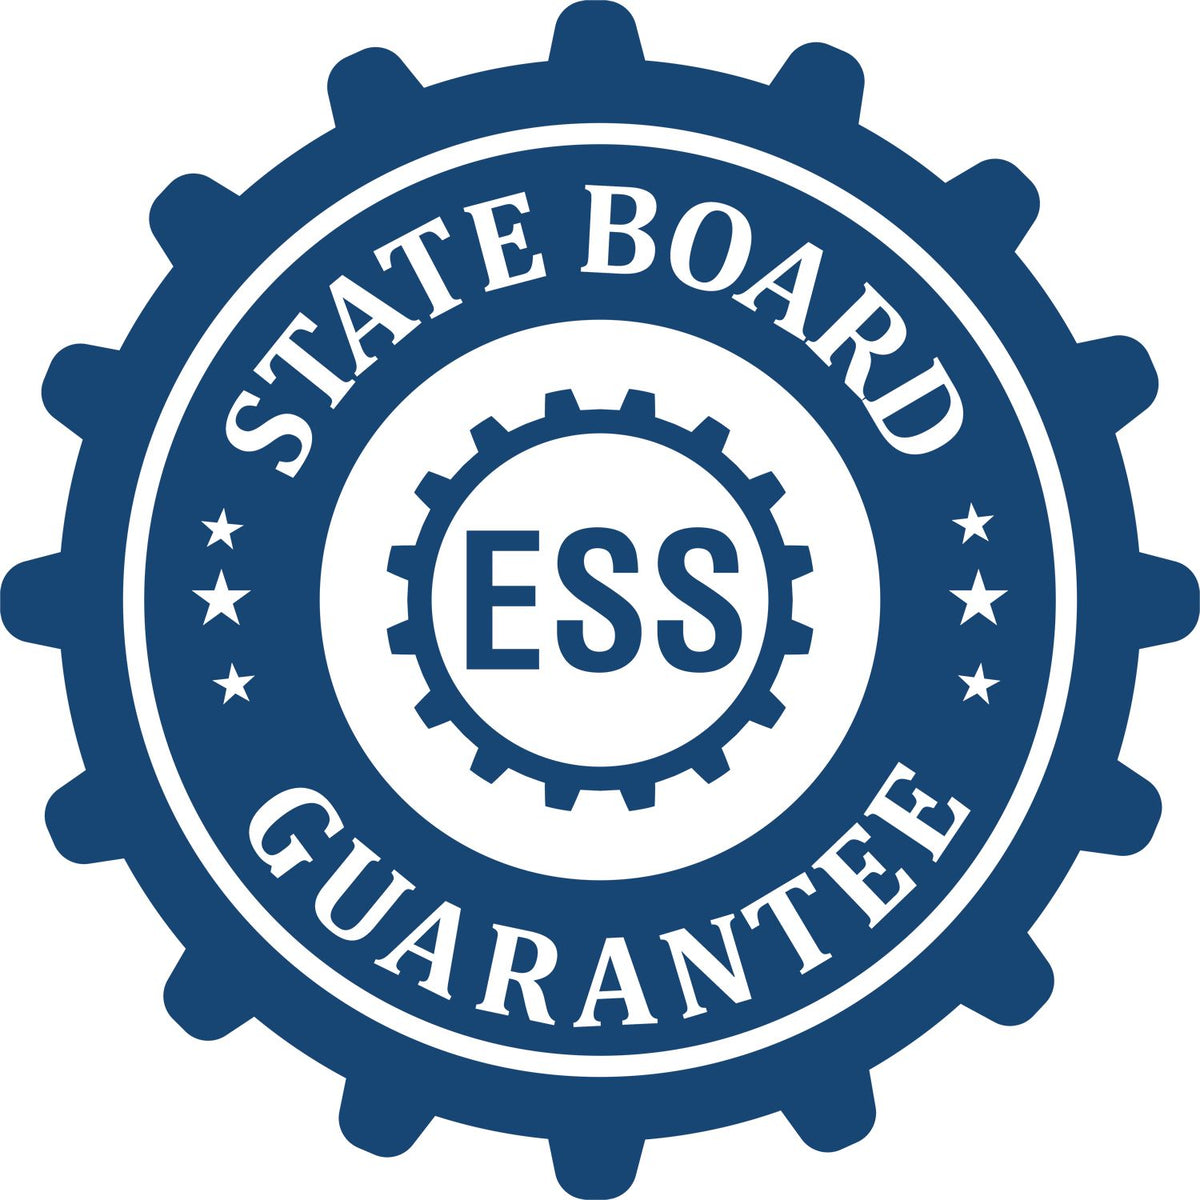 An emblem in a gear shape illustrating a state board guarantee for the Idaho Engineer Desk Seal product.